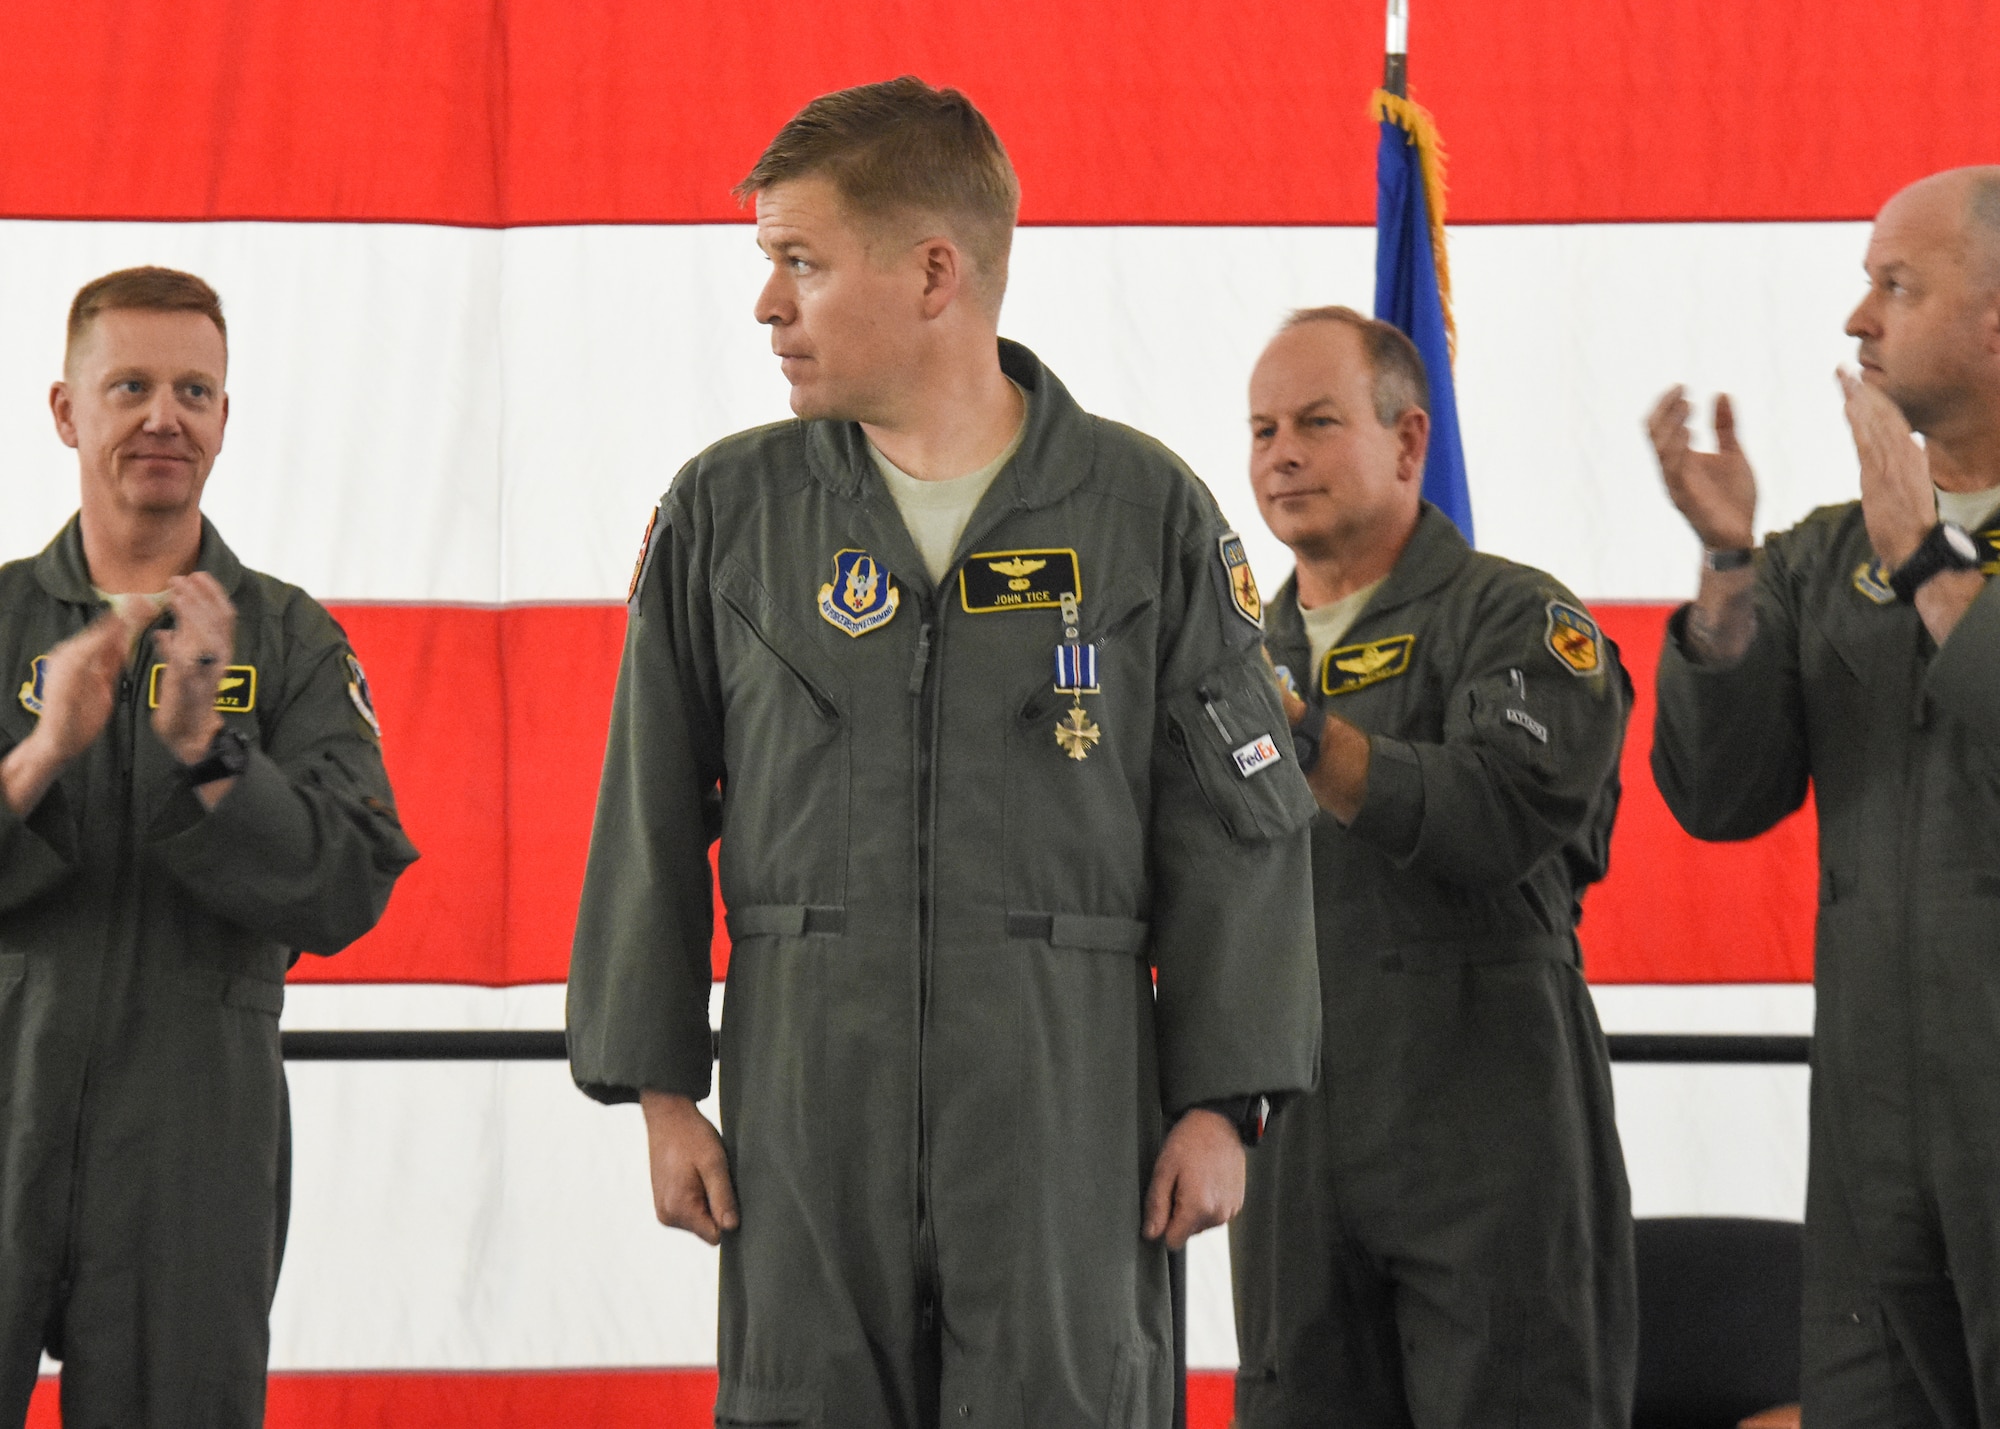 Maj. John Tice, a flight commander with the 303d Fighter Squadron, center, received the Distinguished Flying Cross and is recognized during a ceremony at Whiteman Air Force Base, Mo., Nov. 2, 2019. Tice was awarded for a mission he flew out of Kandahar Air Base, Afghanistan, in December 2010.